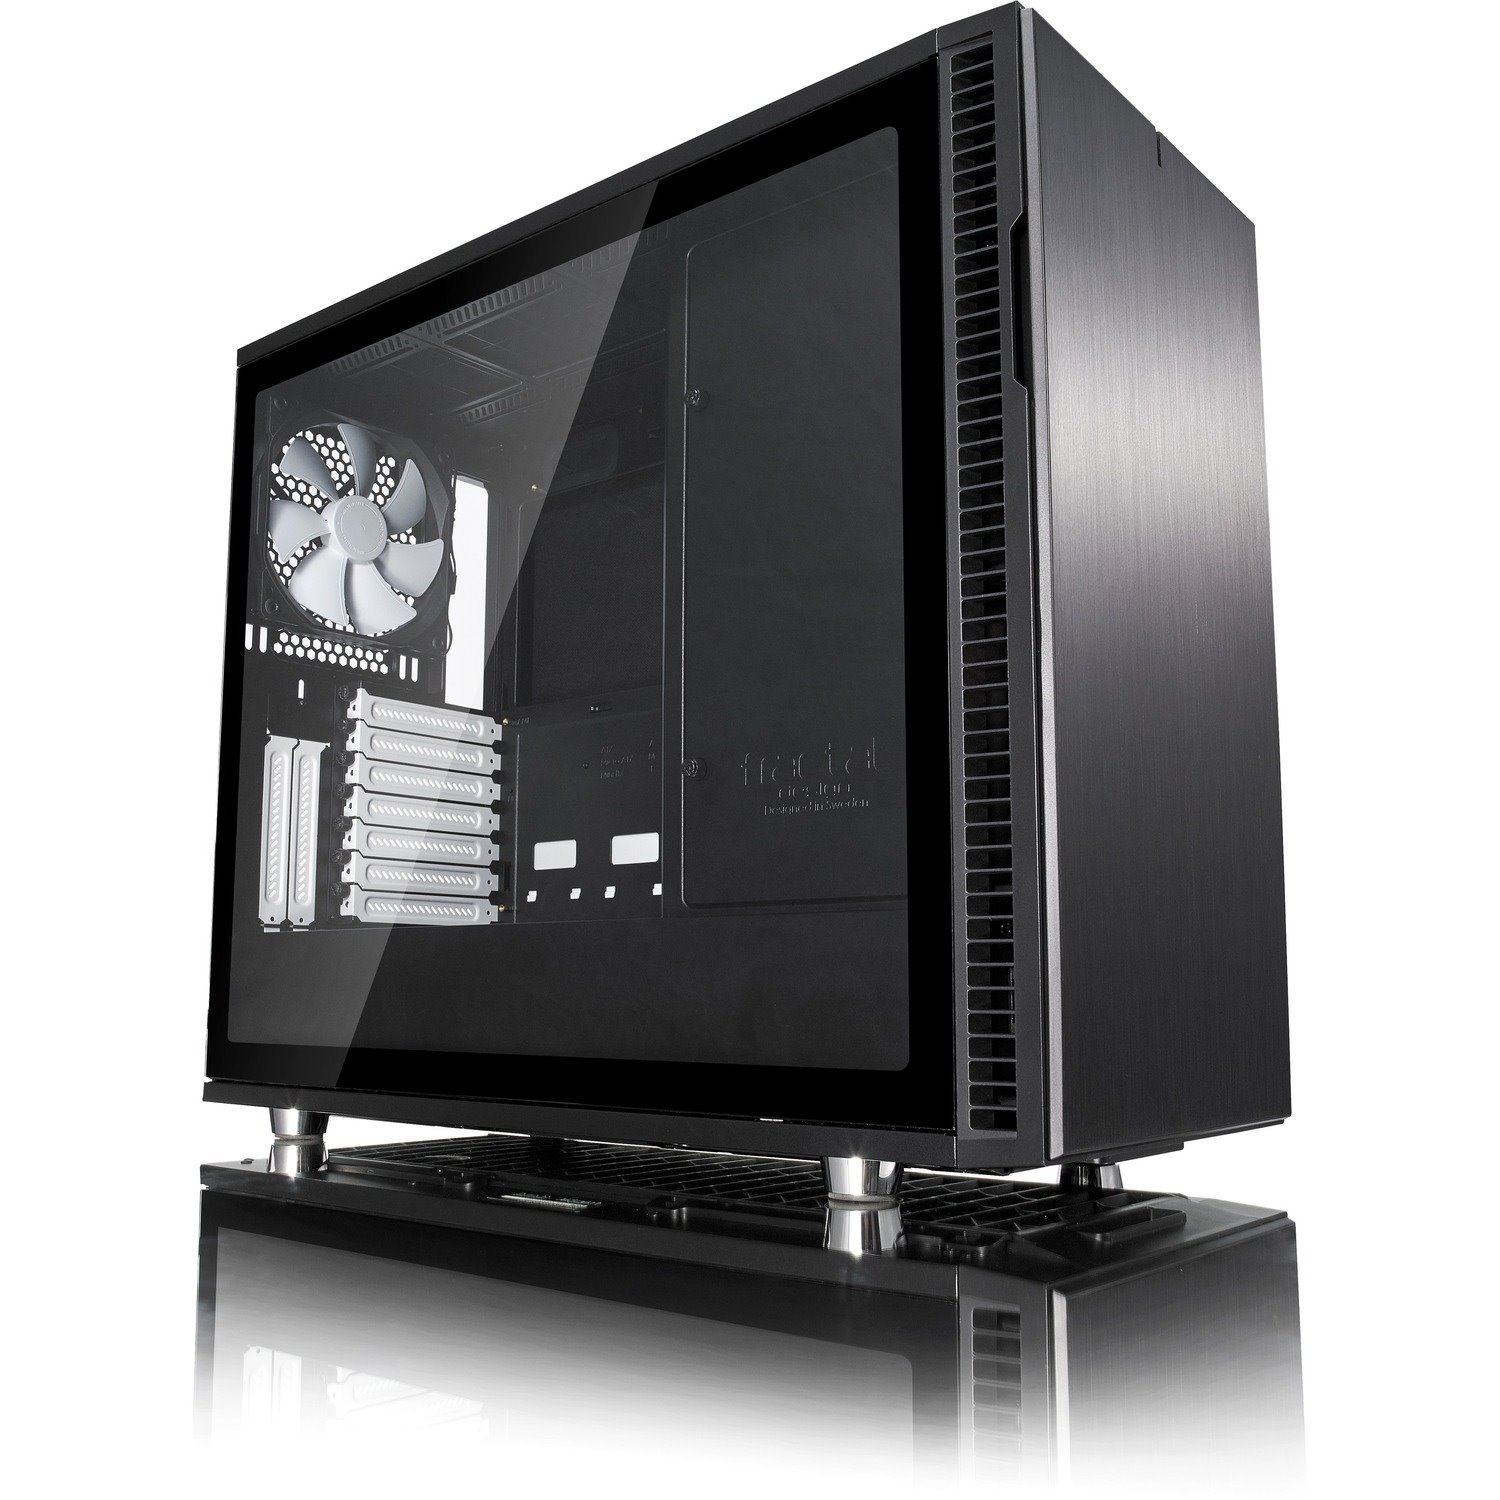 Fractal Design Define R6 Computer Case - EATX, ATX Motherboard Supported - Mid-tower - Steel, Tempered Glass - Black